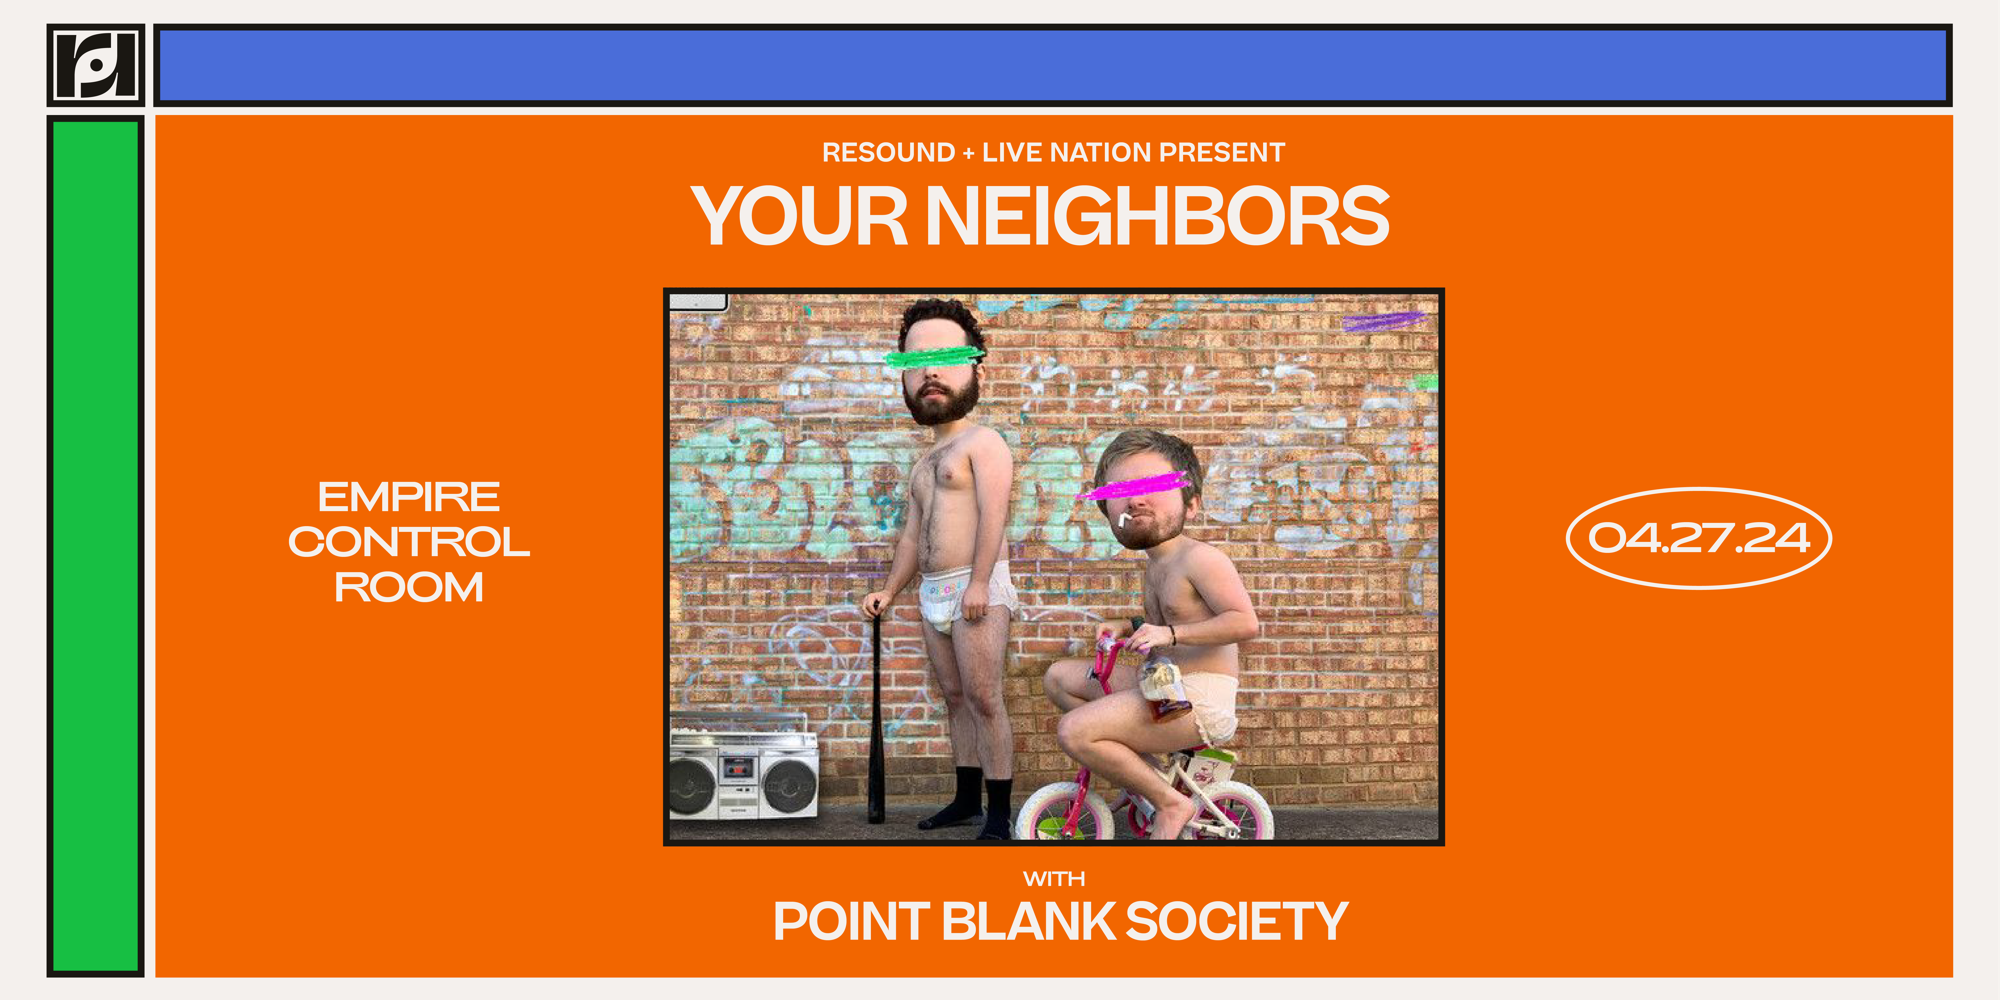 Live Nation + Resound Present: Your Neighbors w/ Point Blank Society at Empire Control Room promotional image